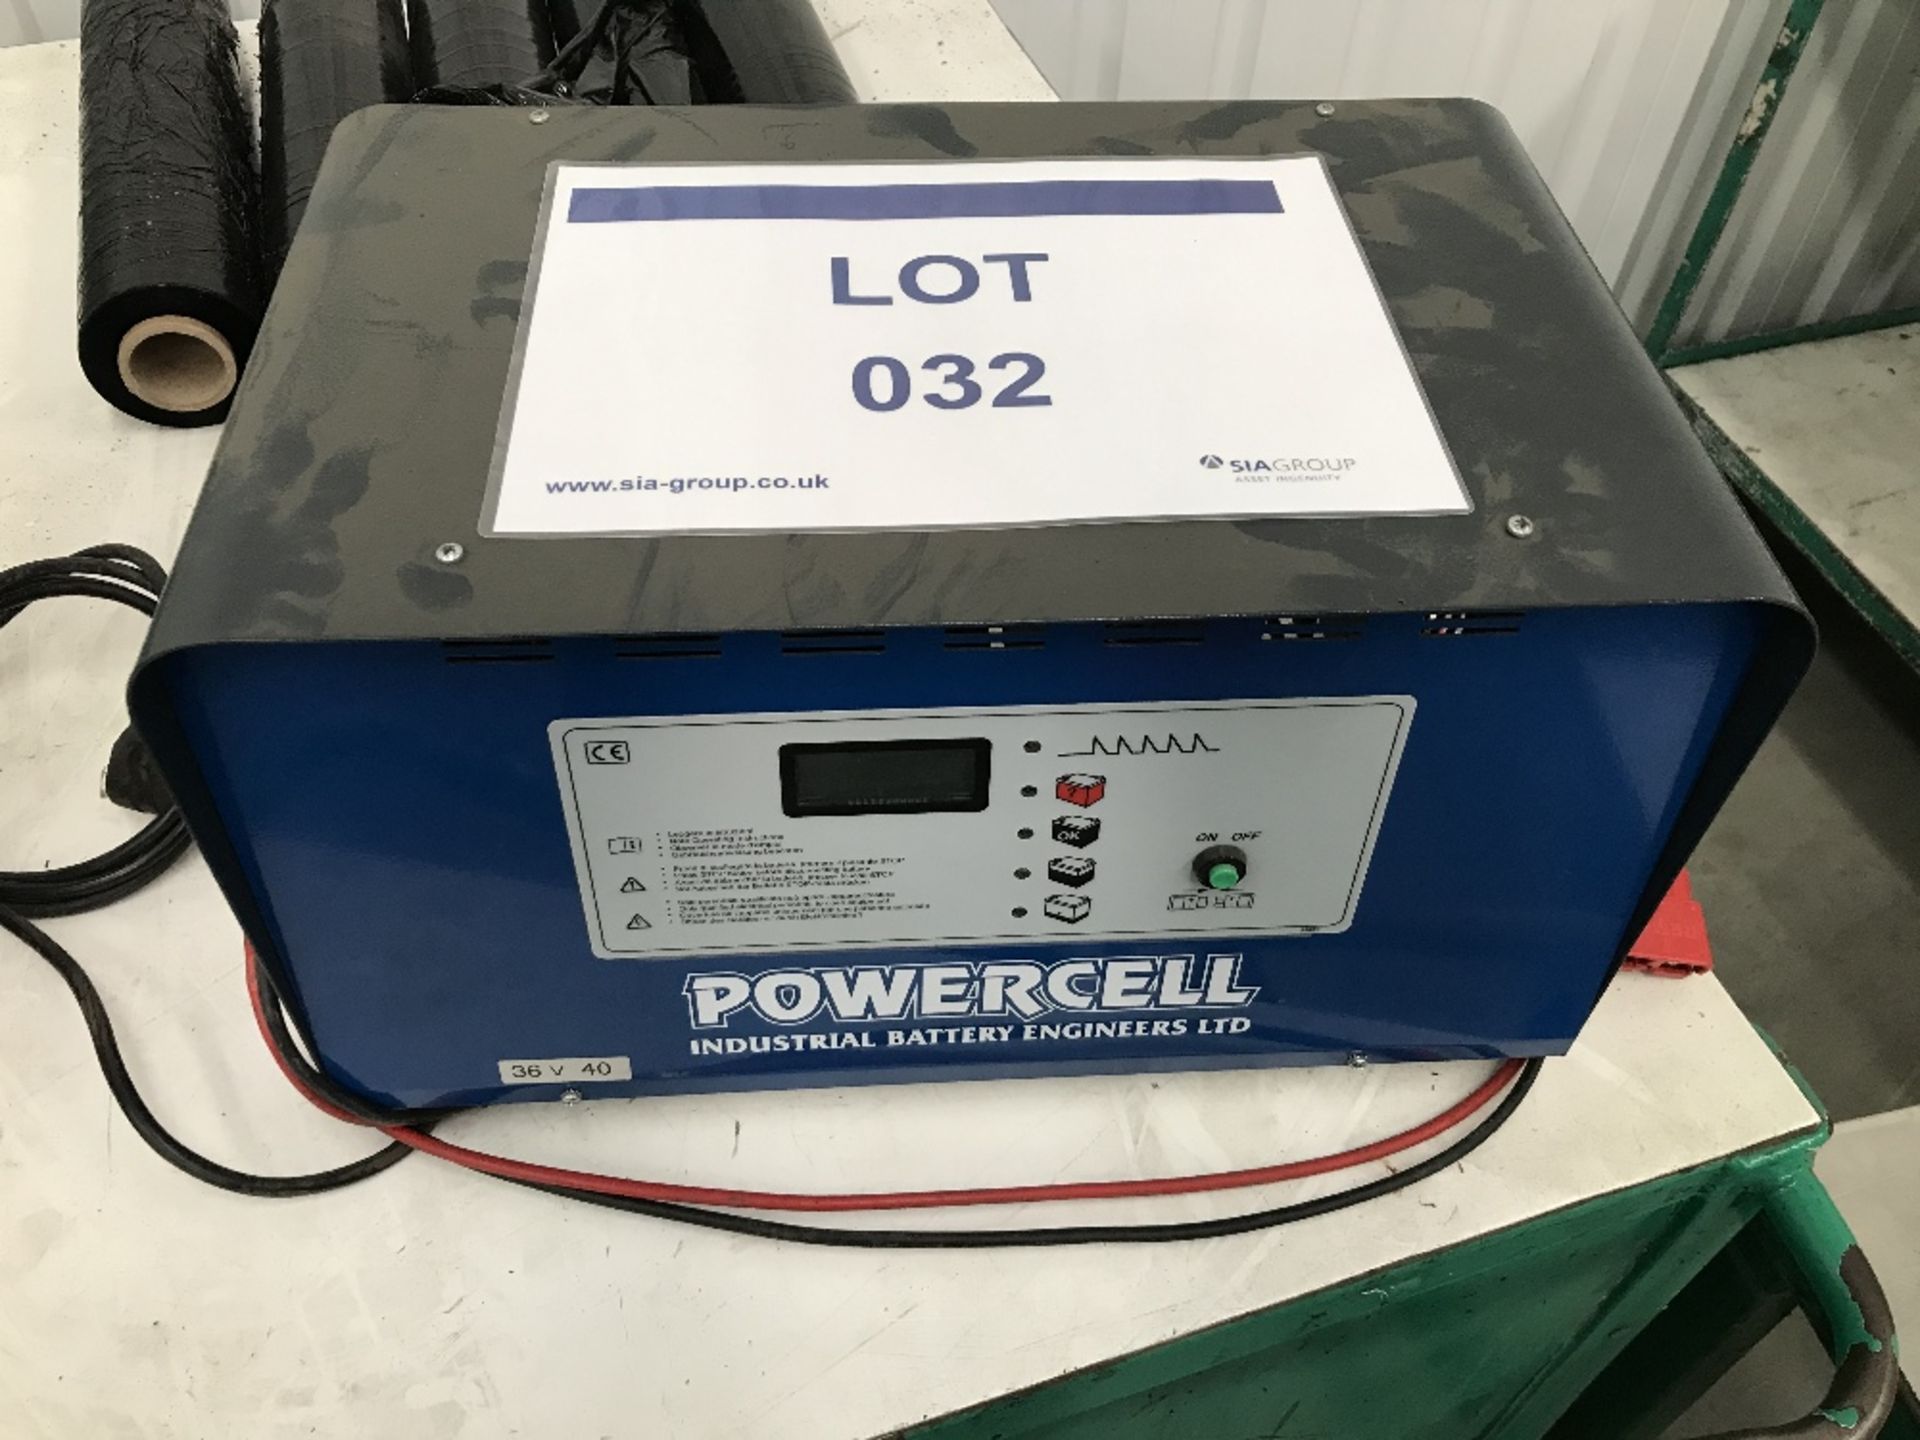 Powercell Matic Point 36V 40A Battery Charger